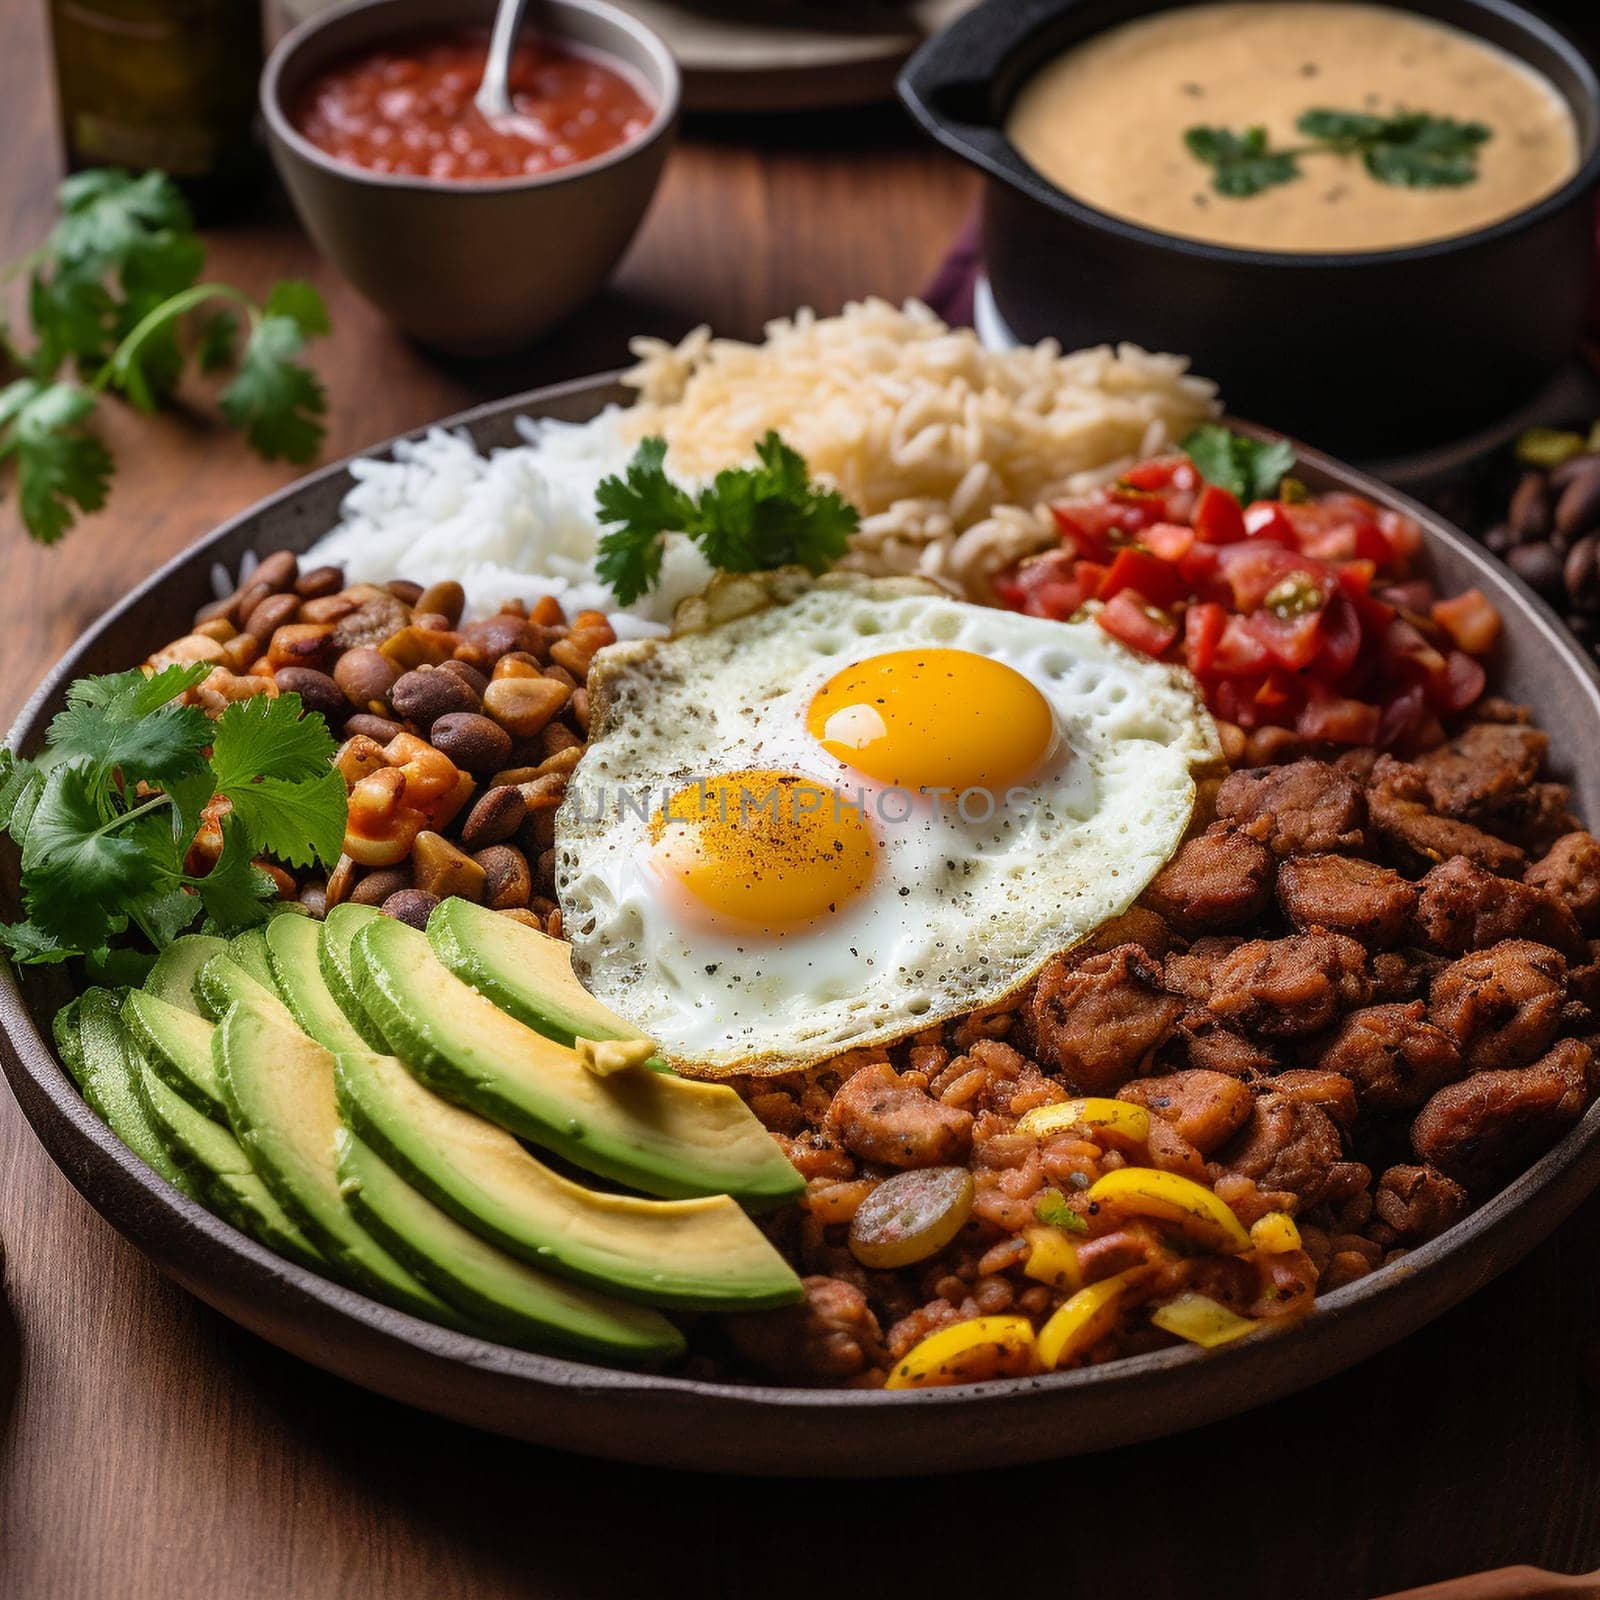 Experience the vibrant flavors and festive atmosphere of a Colombian Bandeja Paisa (mixed platter) in this close-up shot. The dish features a hearty combination of rice, beans, ground meat, chorizo, fried egg, plantains, and avocado, all arranged artfully on a large plate. The dish is garnished with finely chopped cilantro leaves and lime wedges for added freshness. In the background, there's a lively street market scene, with colorful vendors and cheerful music adding to the festive atmosphere. The bright, natural lighting with a reflector enhances the texture and colors of the food, creating a lively and celebratory mood.